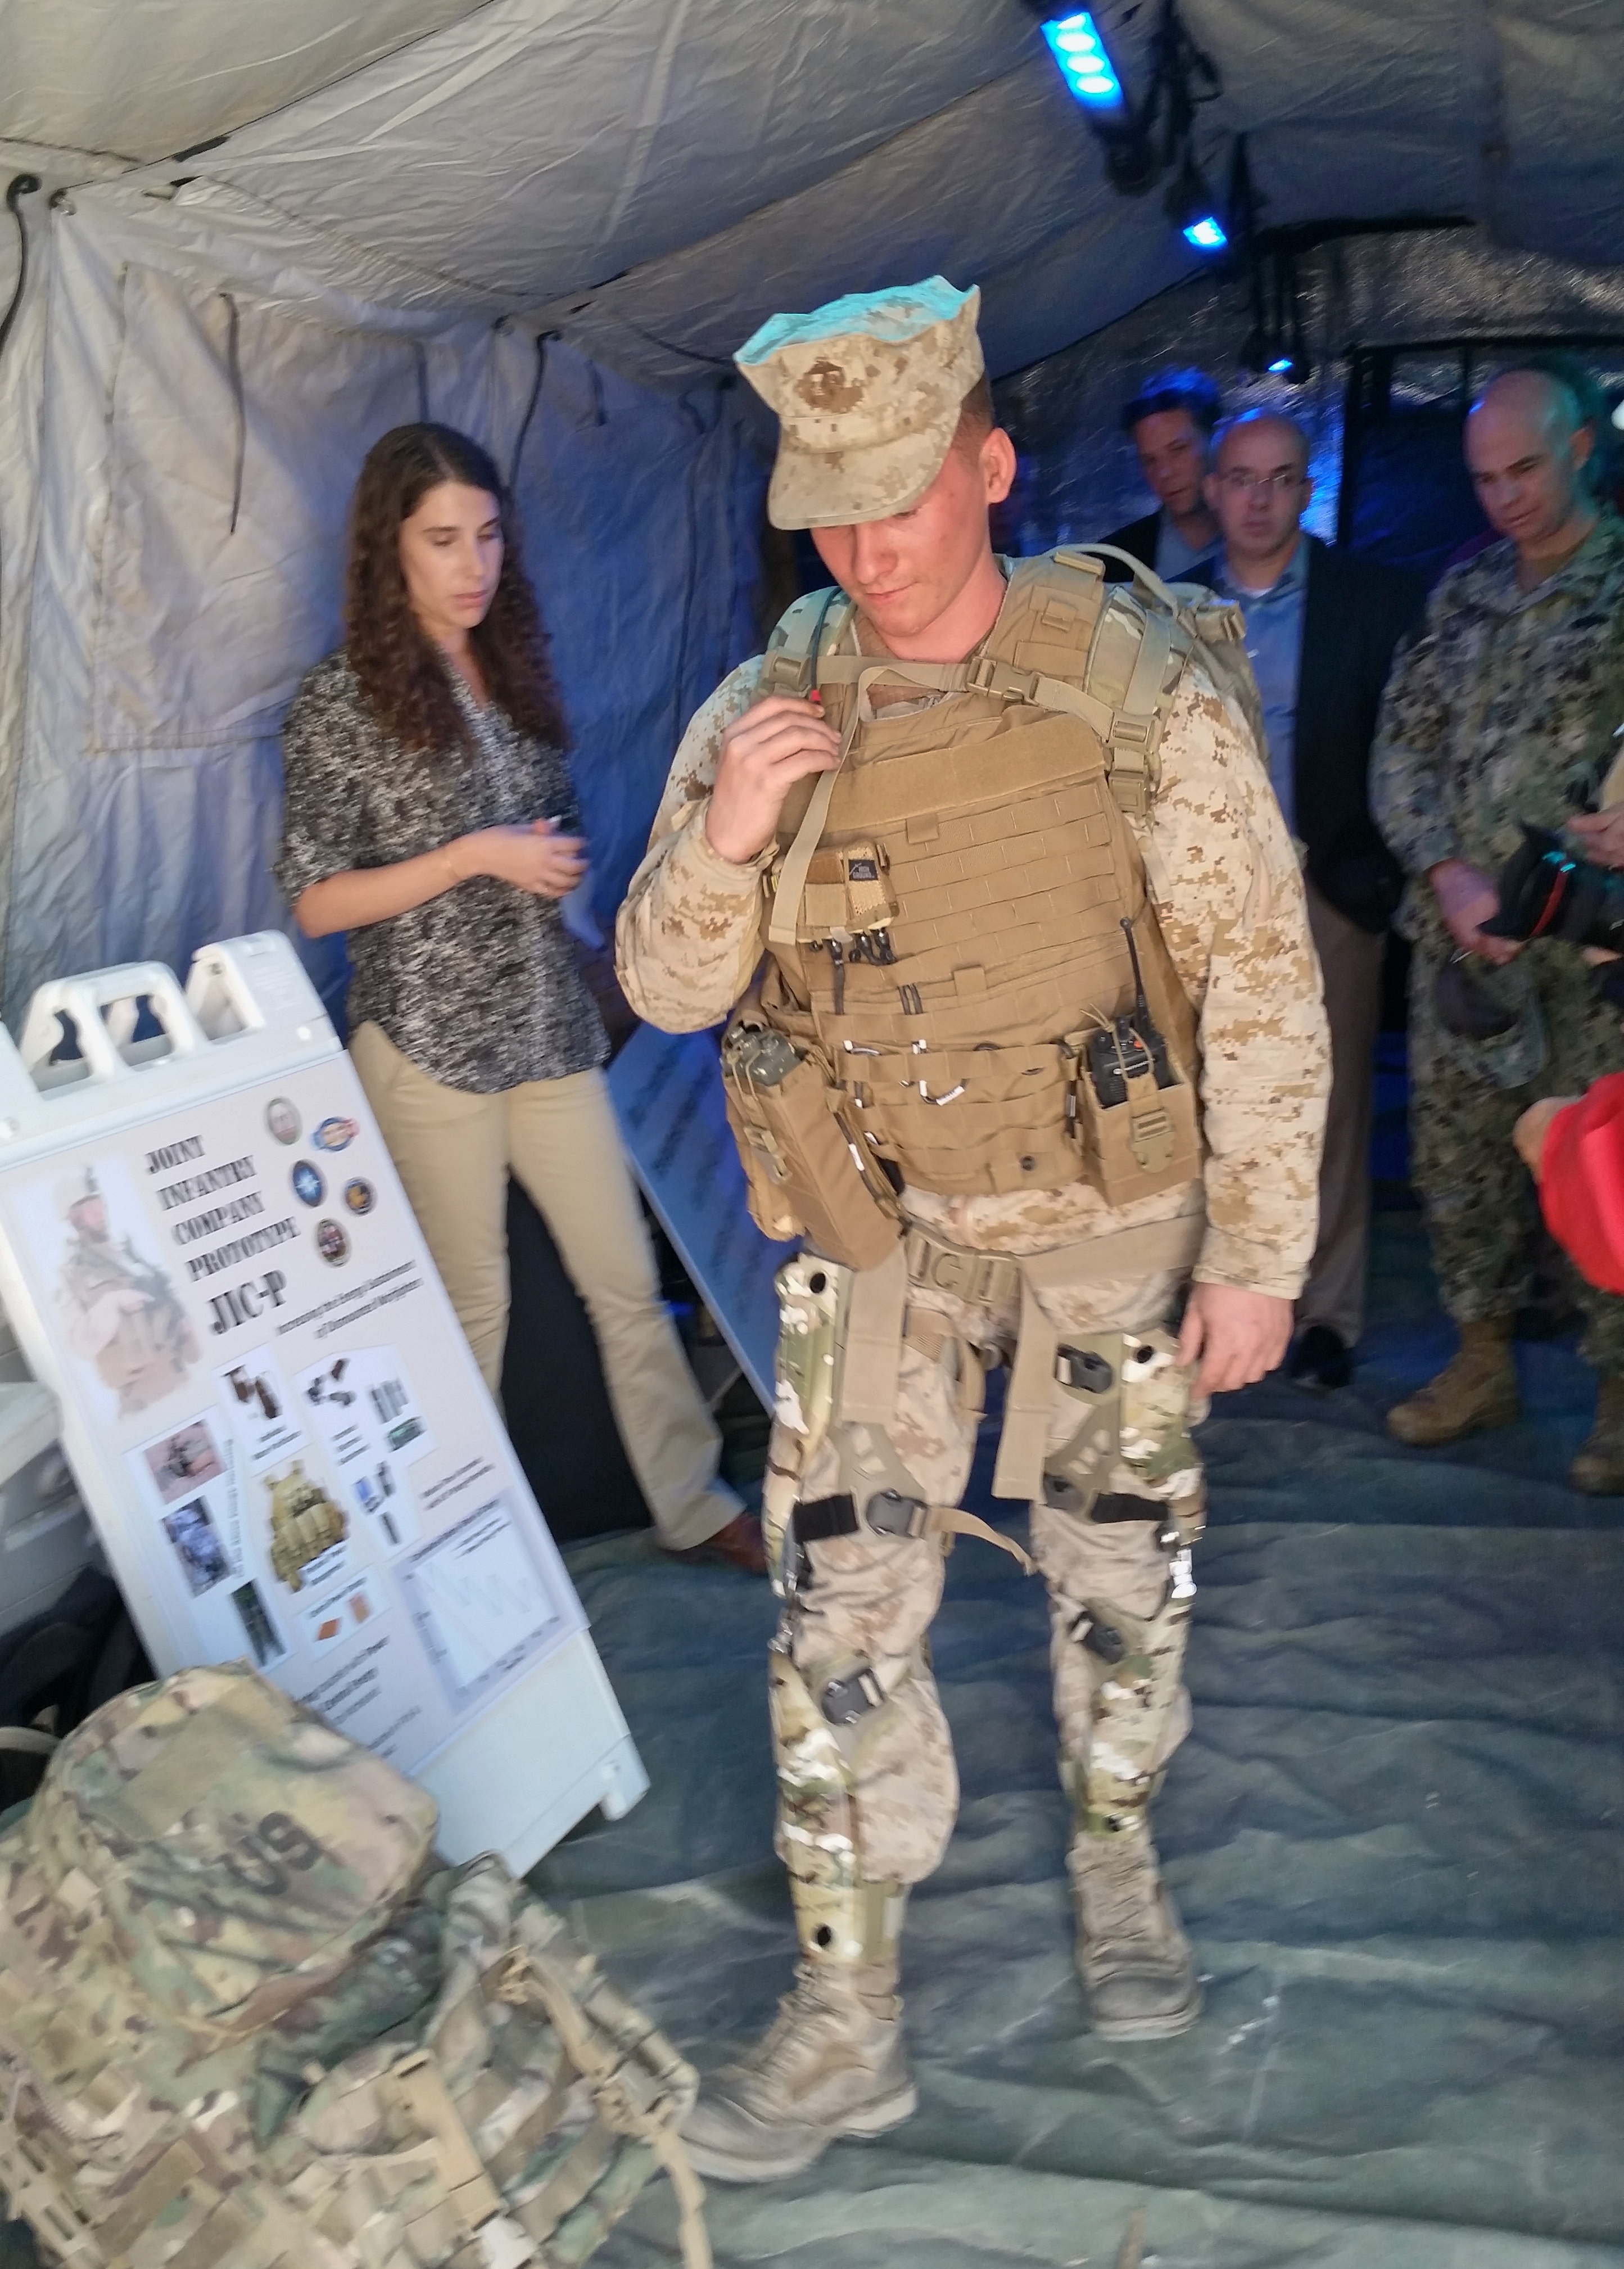 Lance Cpl. Corey Georski demonstrates the Joint Infantry Combat Prototype as Sara Lohmann, lead engineer at Naval Surface Warfare Center Dahlgren, explains how it produces energy that can power gear and recharge batteries whenever the Marine walks or runs. Gidget Fuentes Photo